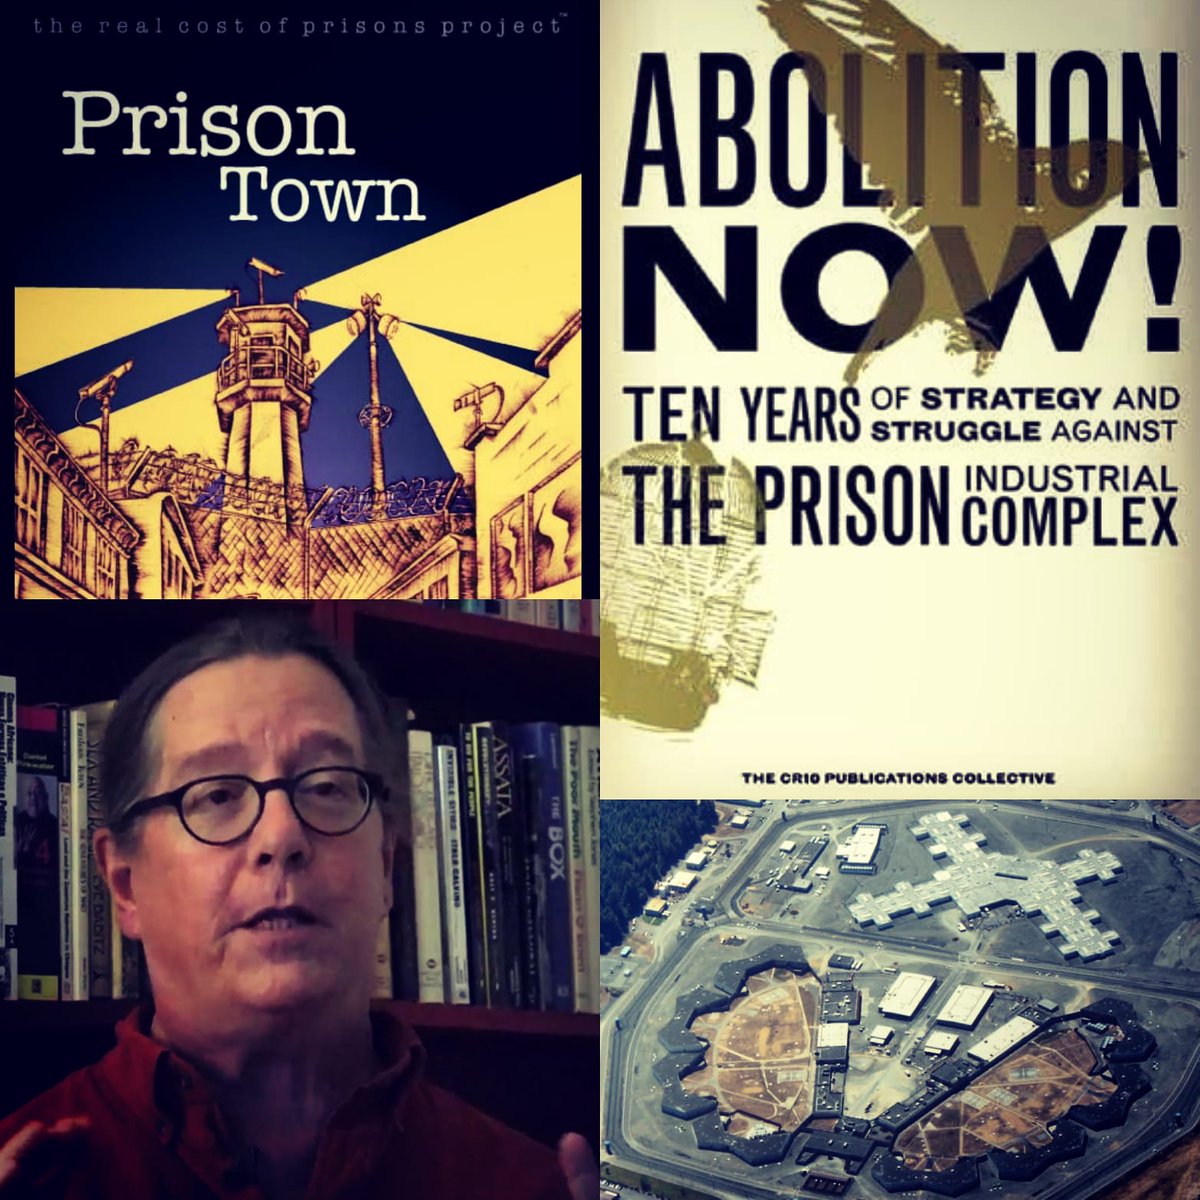 . @CraigOGilmore also stopped by this year to offer analysis & insight from his history organizing to stop prison construction & working in the abolitionist movement for many years. In this he also deals with many of the recent critical discussions  …https://millennialsarekillingcapitalism.libsyn.com/abolition-is-inherently-experimental-craig-gilmore-on-fighting-prisons-and-defunding-police